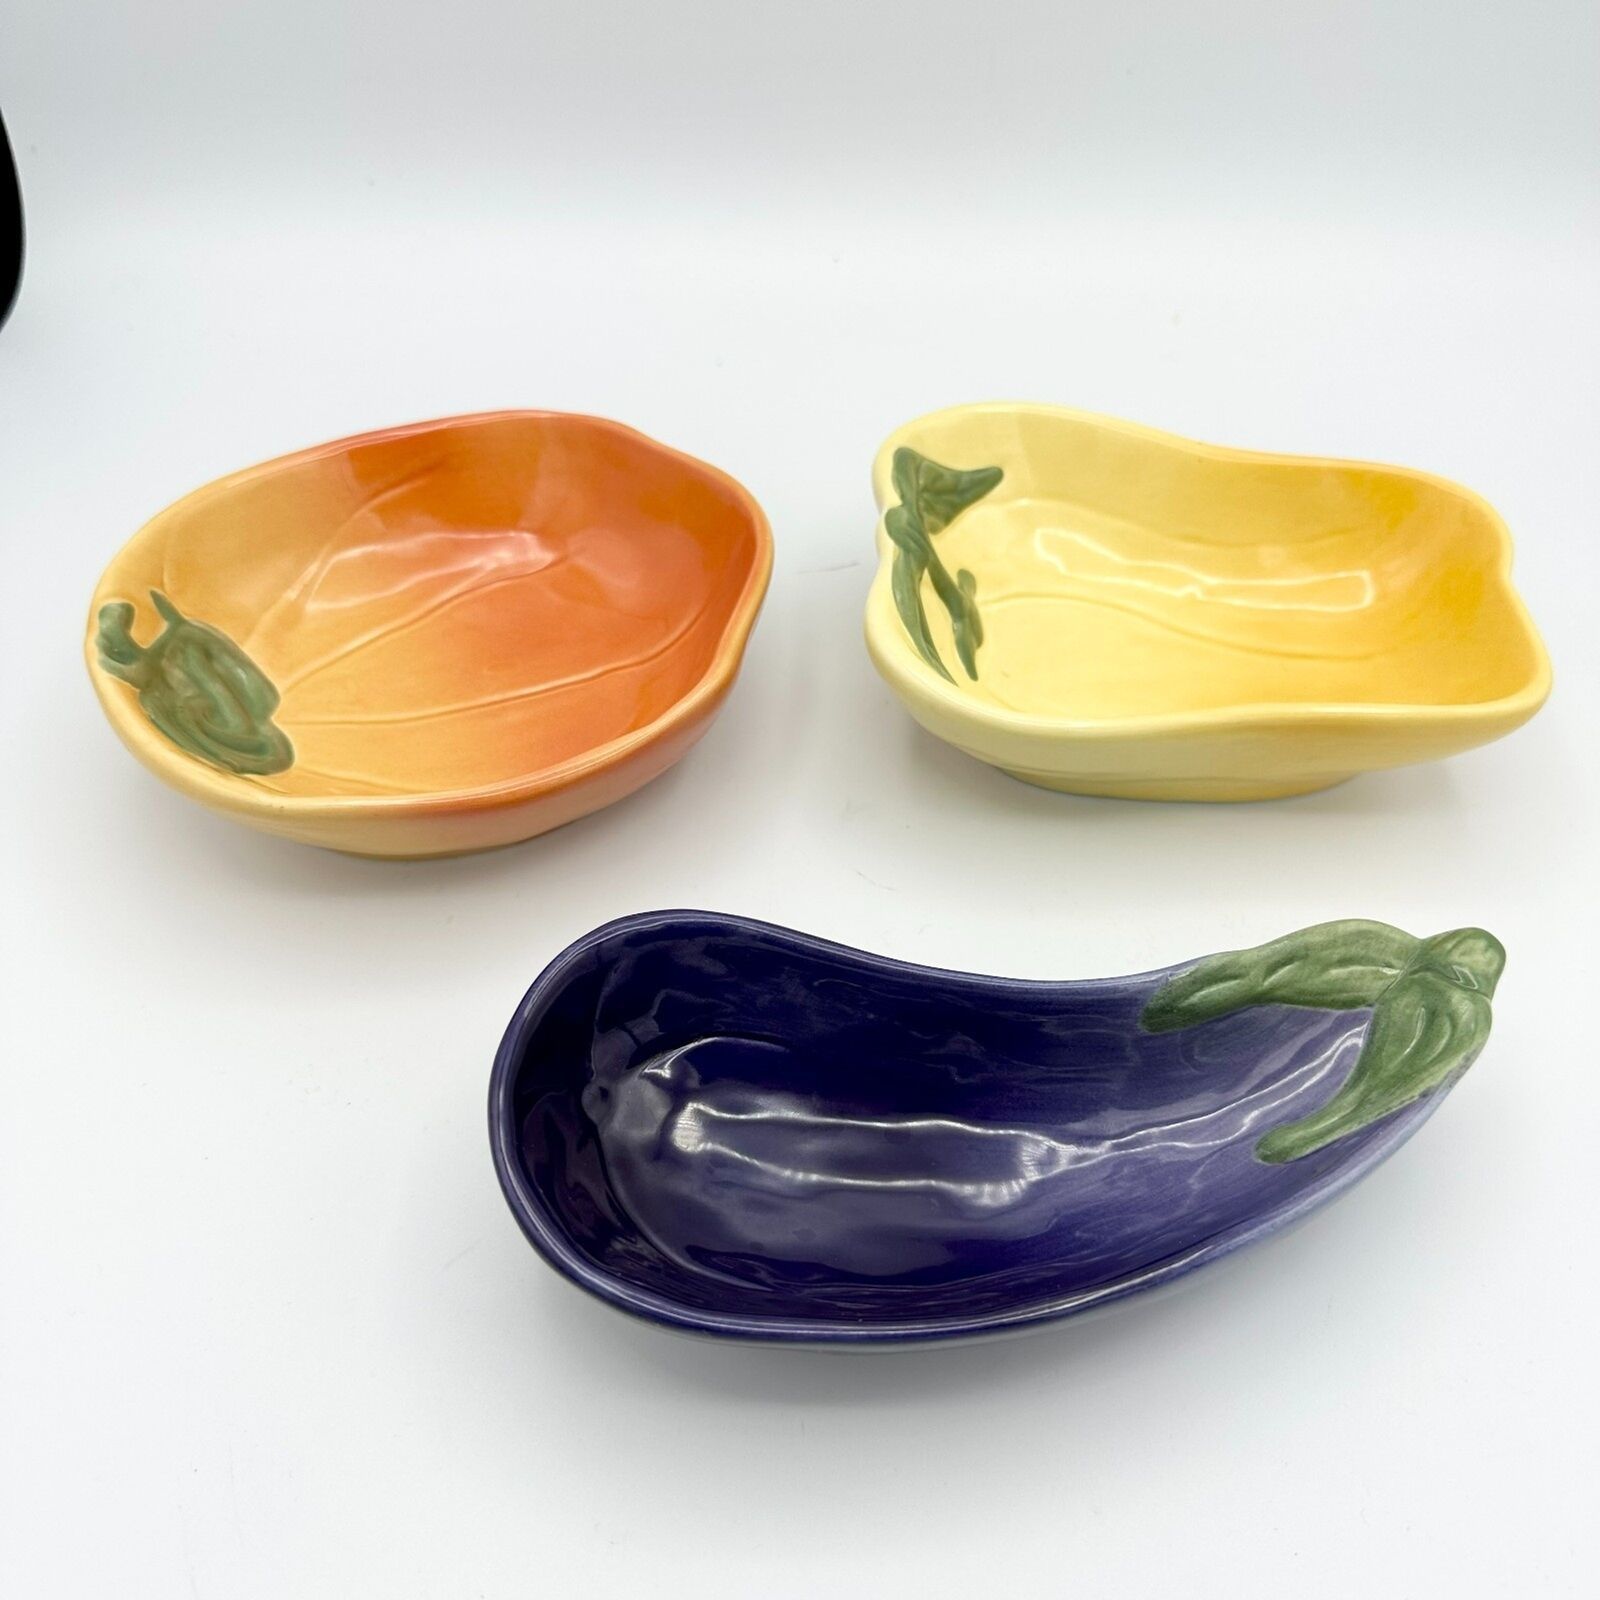 Primary image for Williams Sonoma Jardin Potager Collection Vegetable Dip Bowls Set of 3